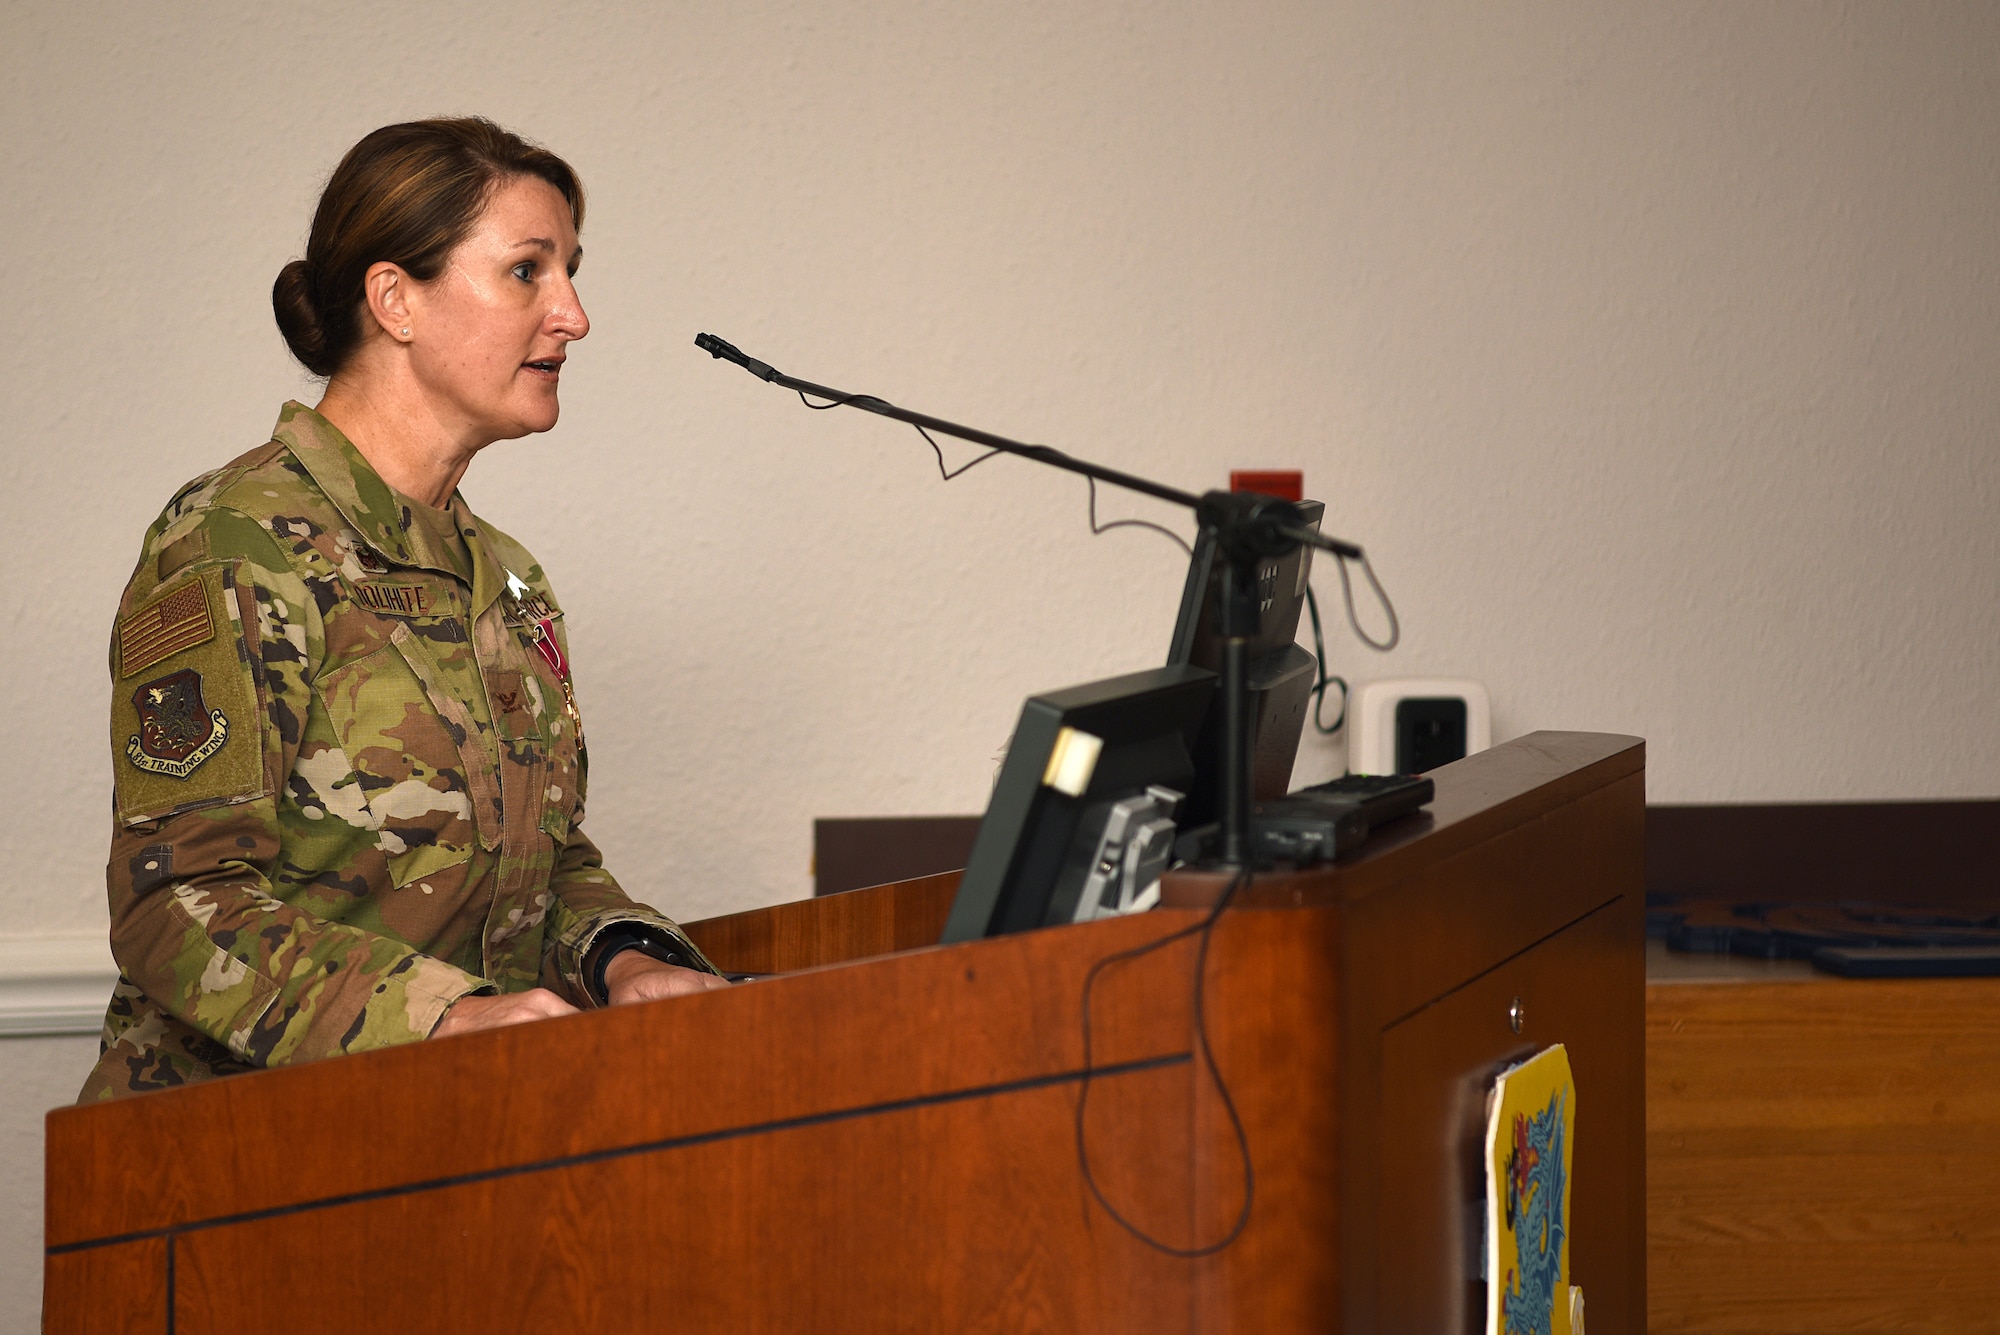 U.S. Air Force Col. Beatrice Dolihite, outgoing 81st Medical Group commander, delivers remarks during the 81st MDG change of command ceremony inside the Don Wiley Auditorium at Keesler Air Force Base, Mississippi, July 21, 2020. Dolihite relinquished command to Col. Christopher Estridge, incoming 81st MDG commander. (U.S. Air Force photo by Senior Airman Suzie Plotnikov)